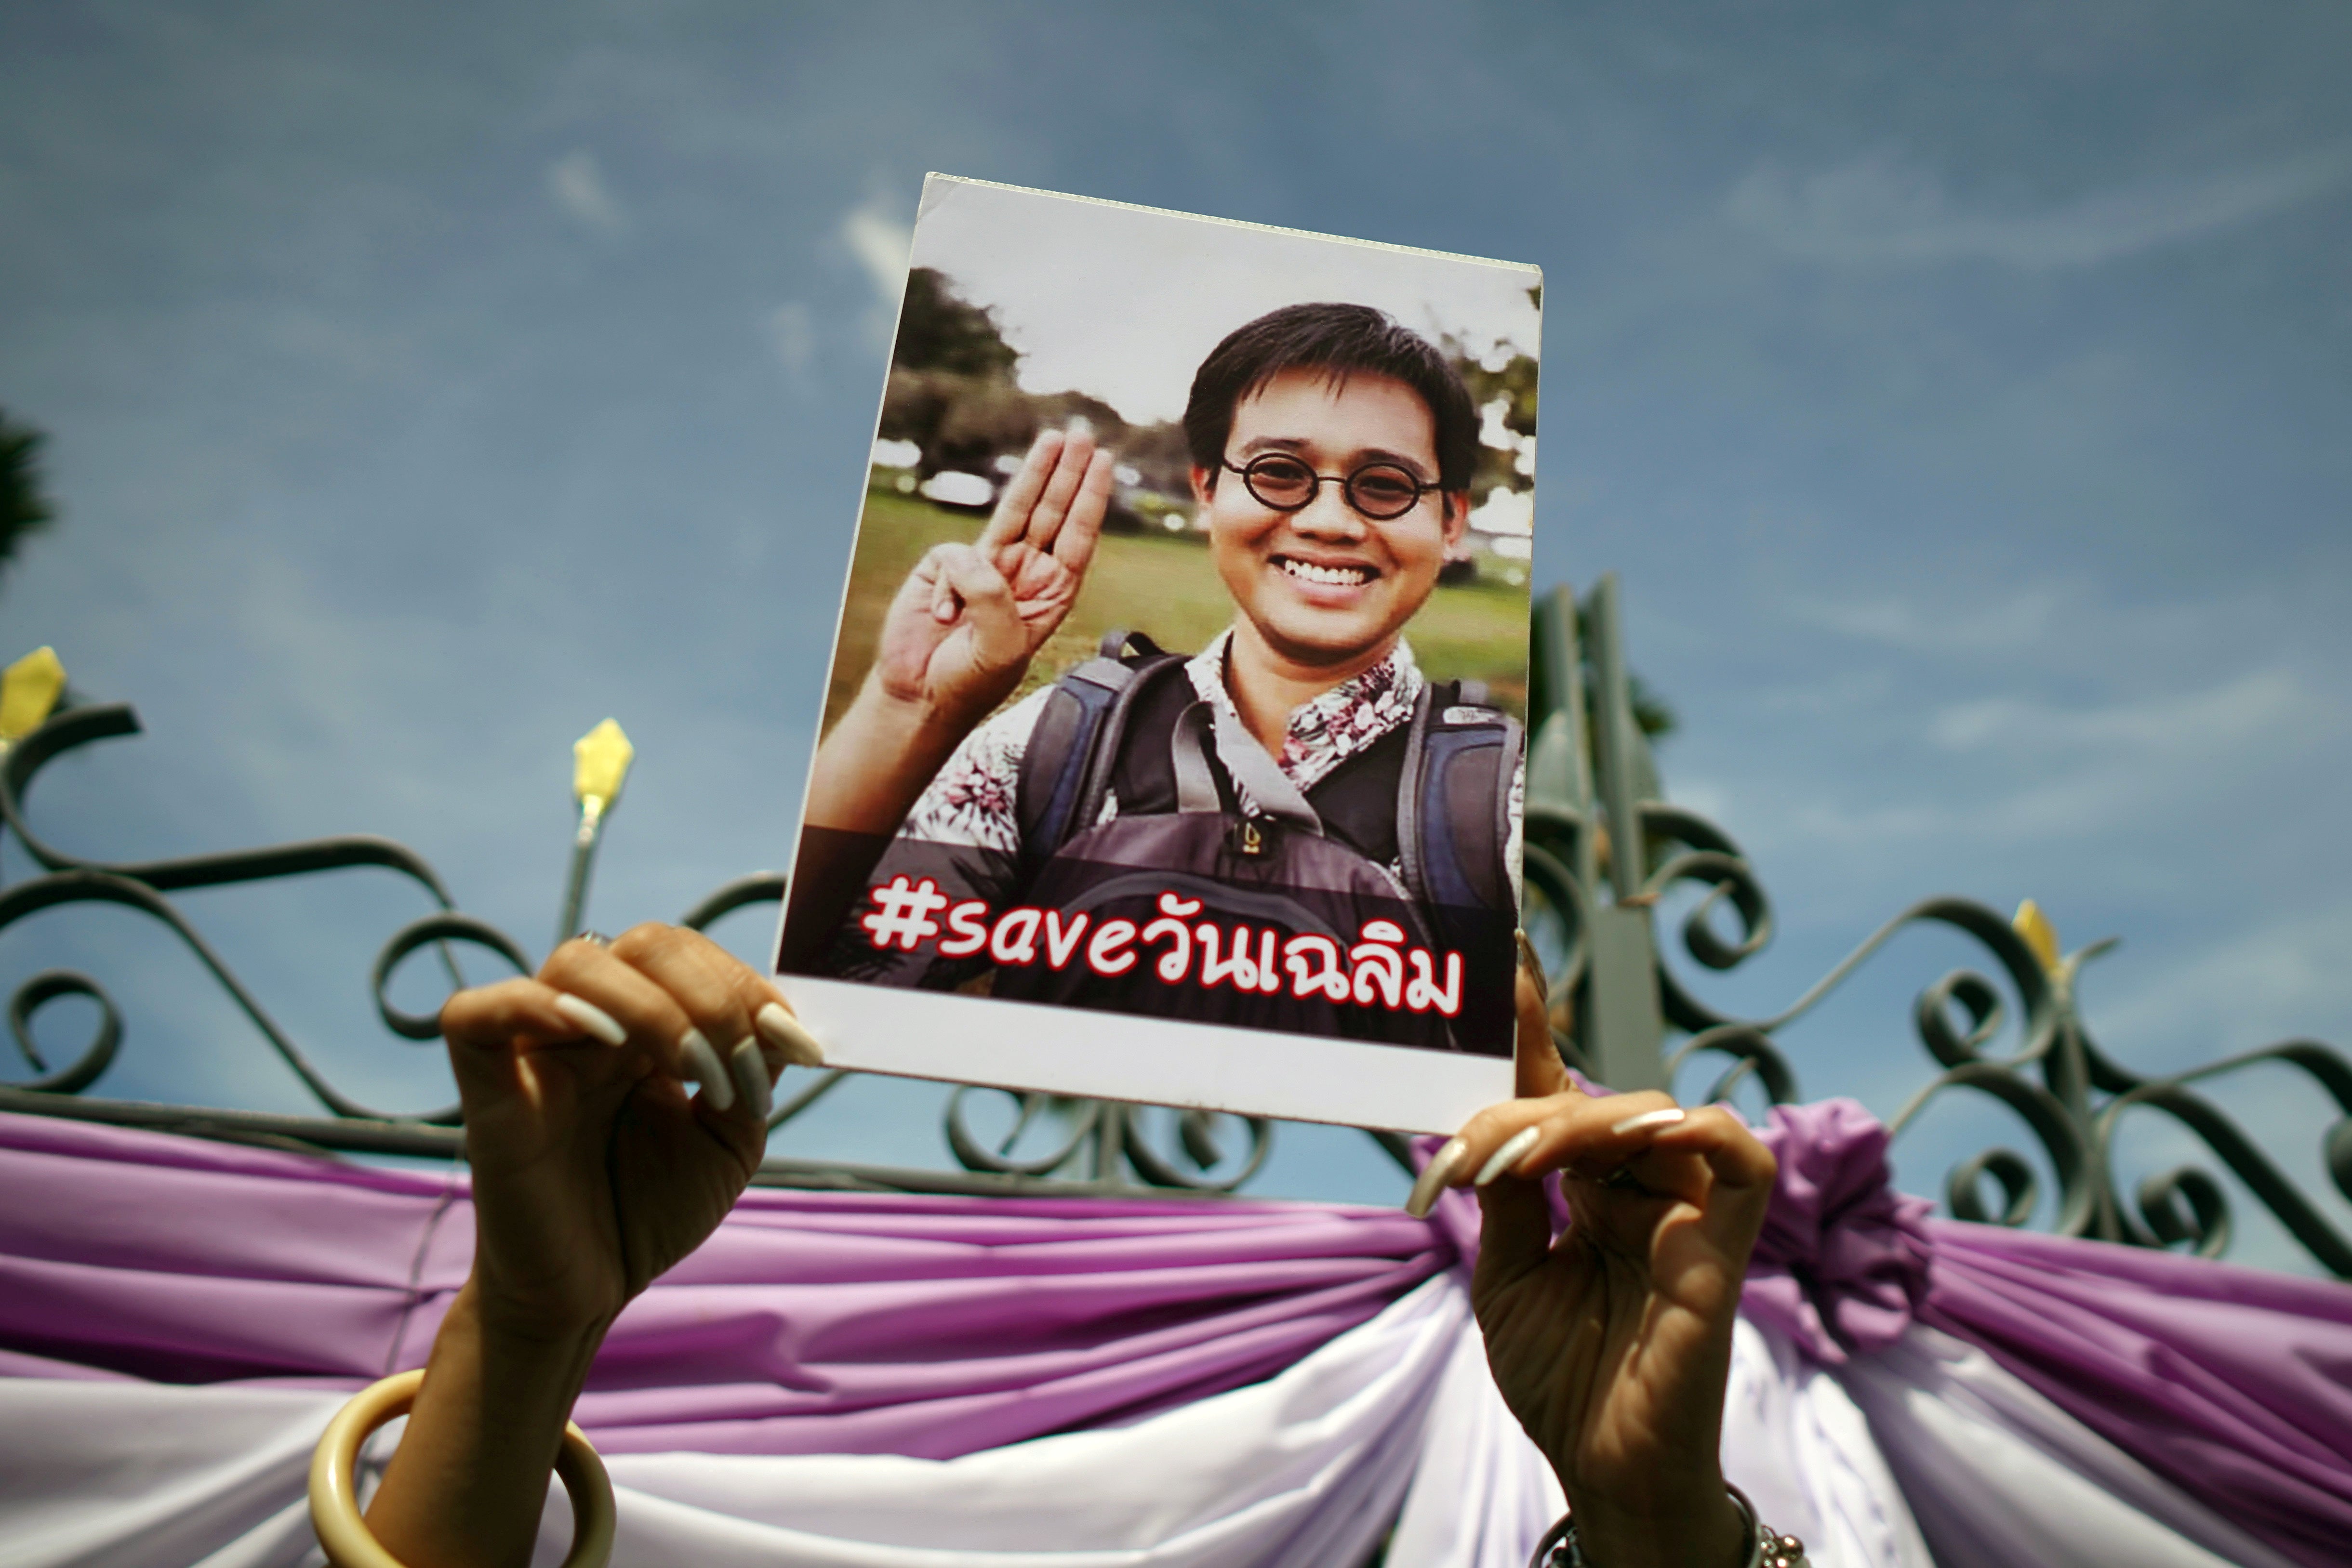 A photo of Thai activist Wanchalearm Satsaksit being held up as people gather in support of him during a protest calling for an investigation, in front of Government House in Bangkok, Thailand, June 12, 2020.